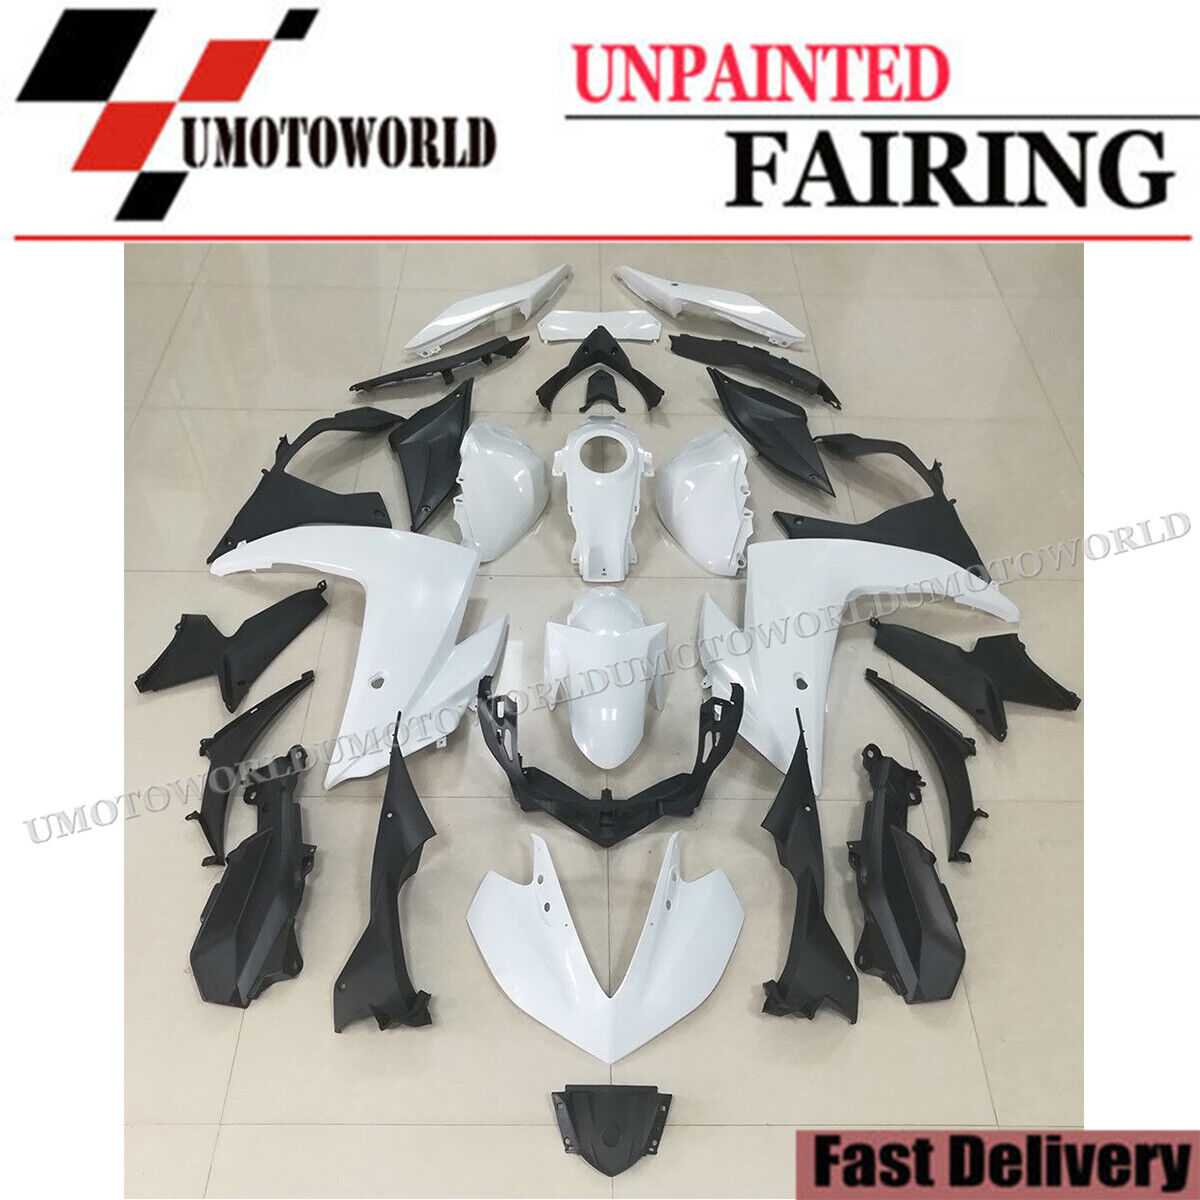 Fairing Kit For Yamaha YZF R3 2014-2018 or R25 2015-17 Unpainted Black Injection